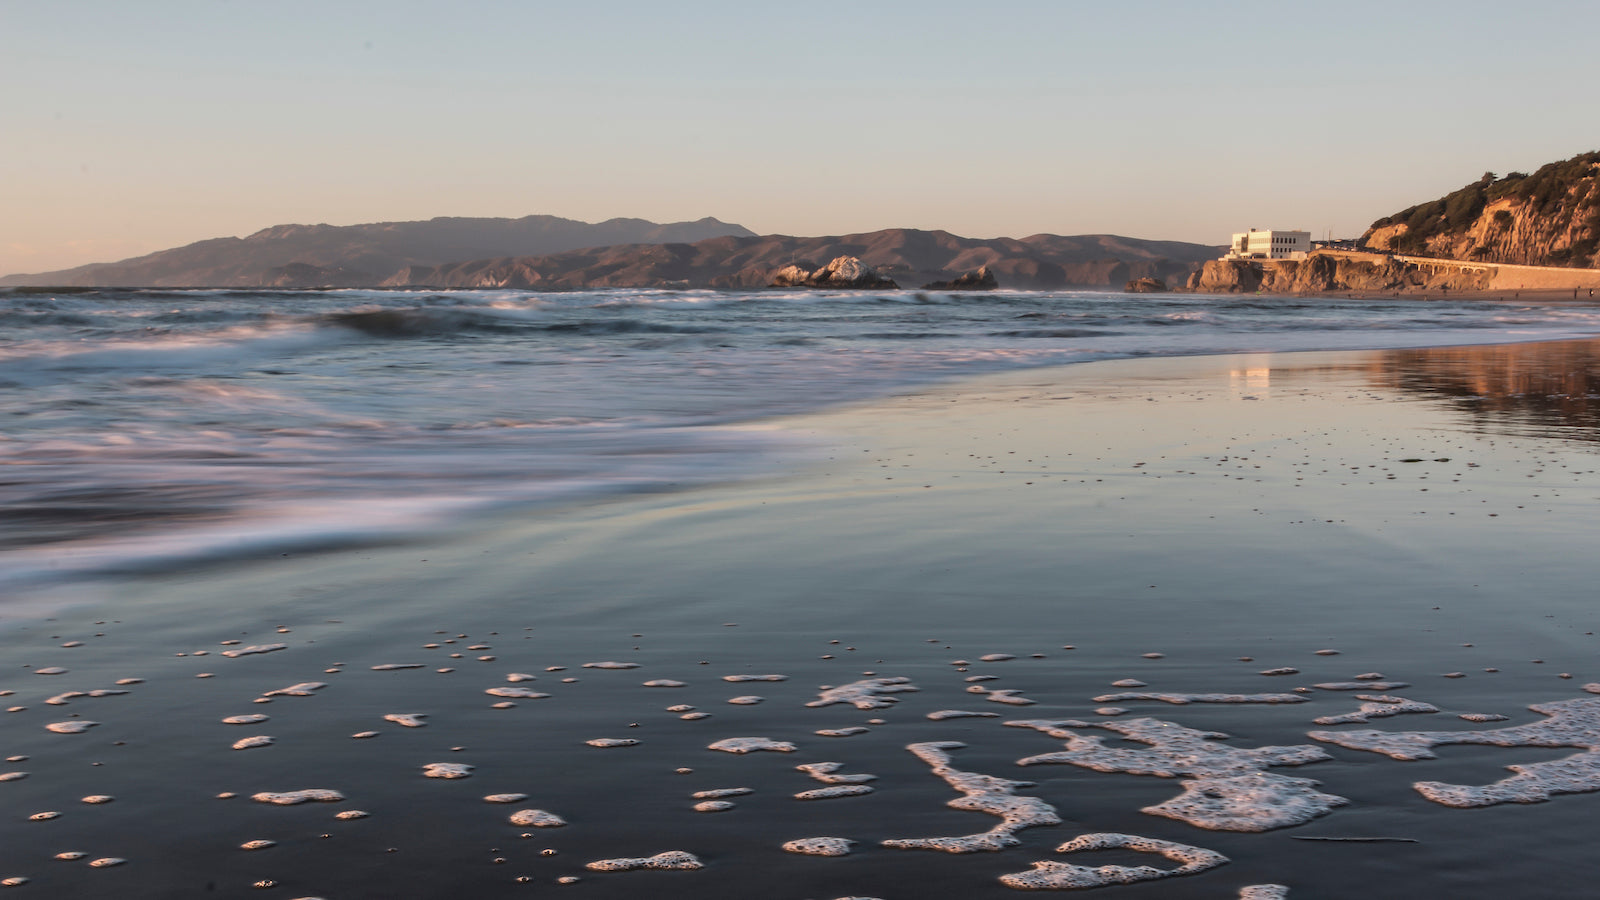 A view looking at the Cliff House and Marin Headlands from San Francisco's Ocean Beach.